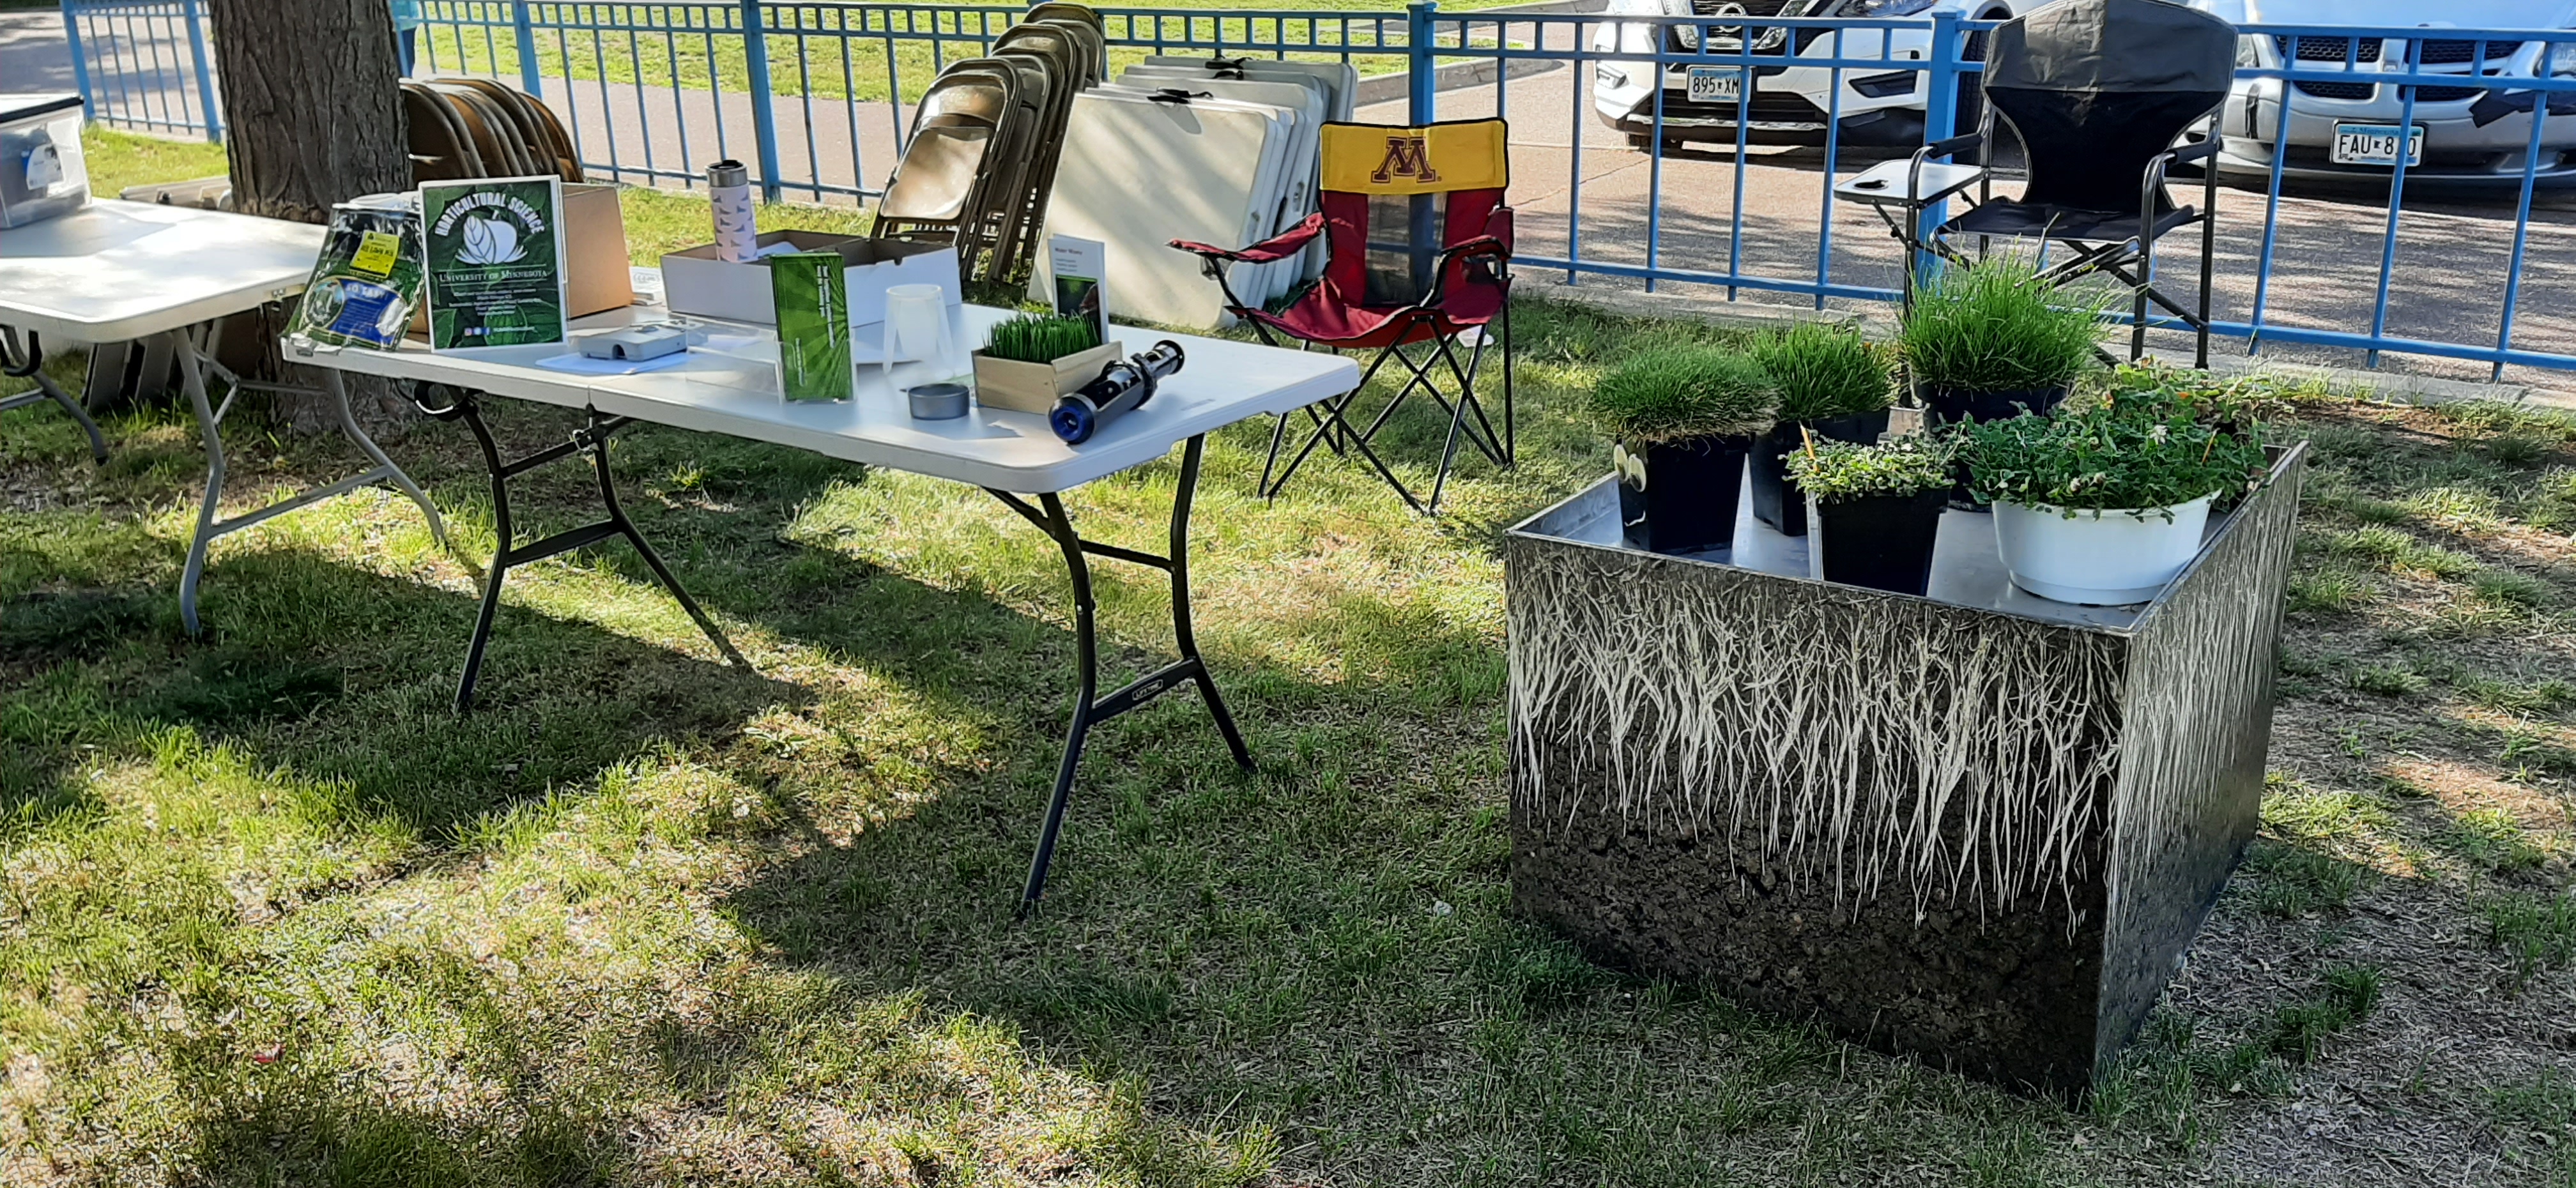 a table and turfgrass display materials at an outdoor event